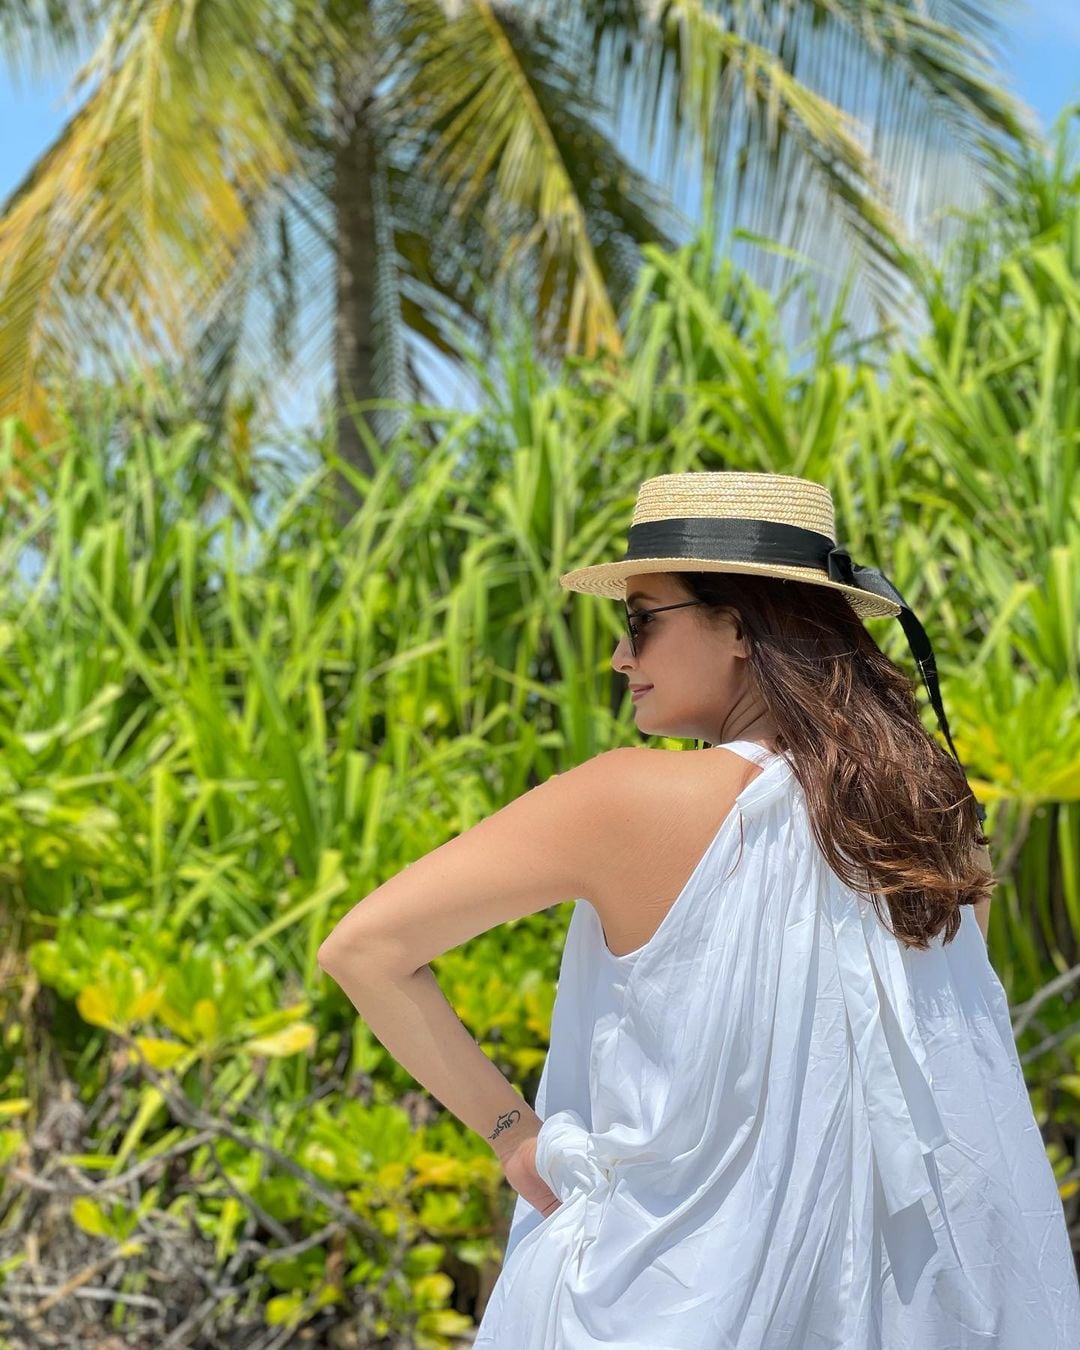  Dia Mirza looks glam in a resort dress topped with a straw hat and glares. (Image: Instagram)